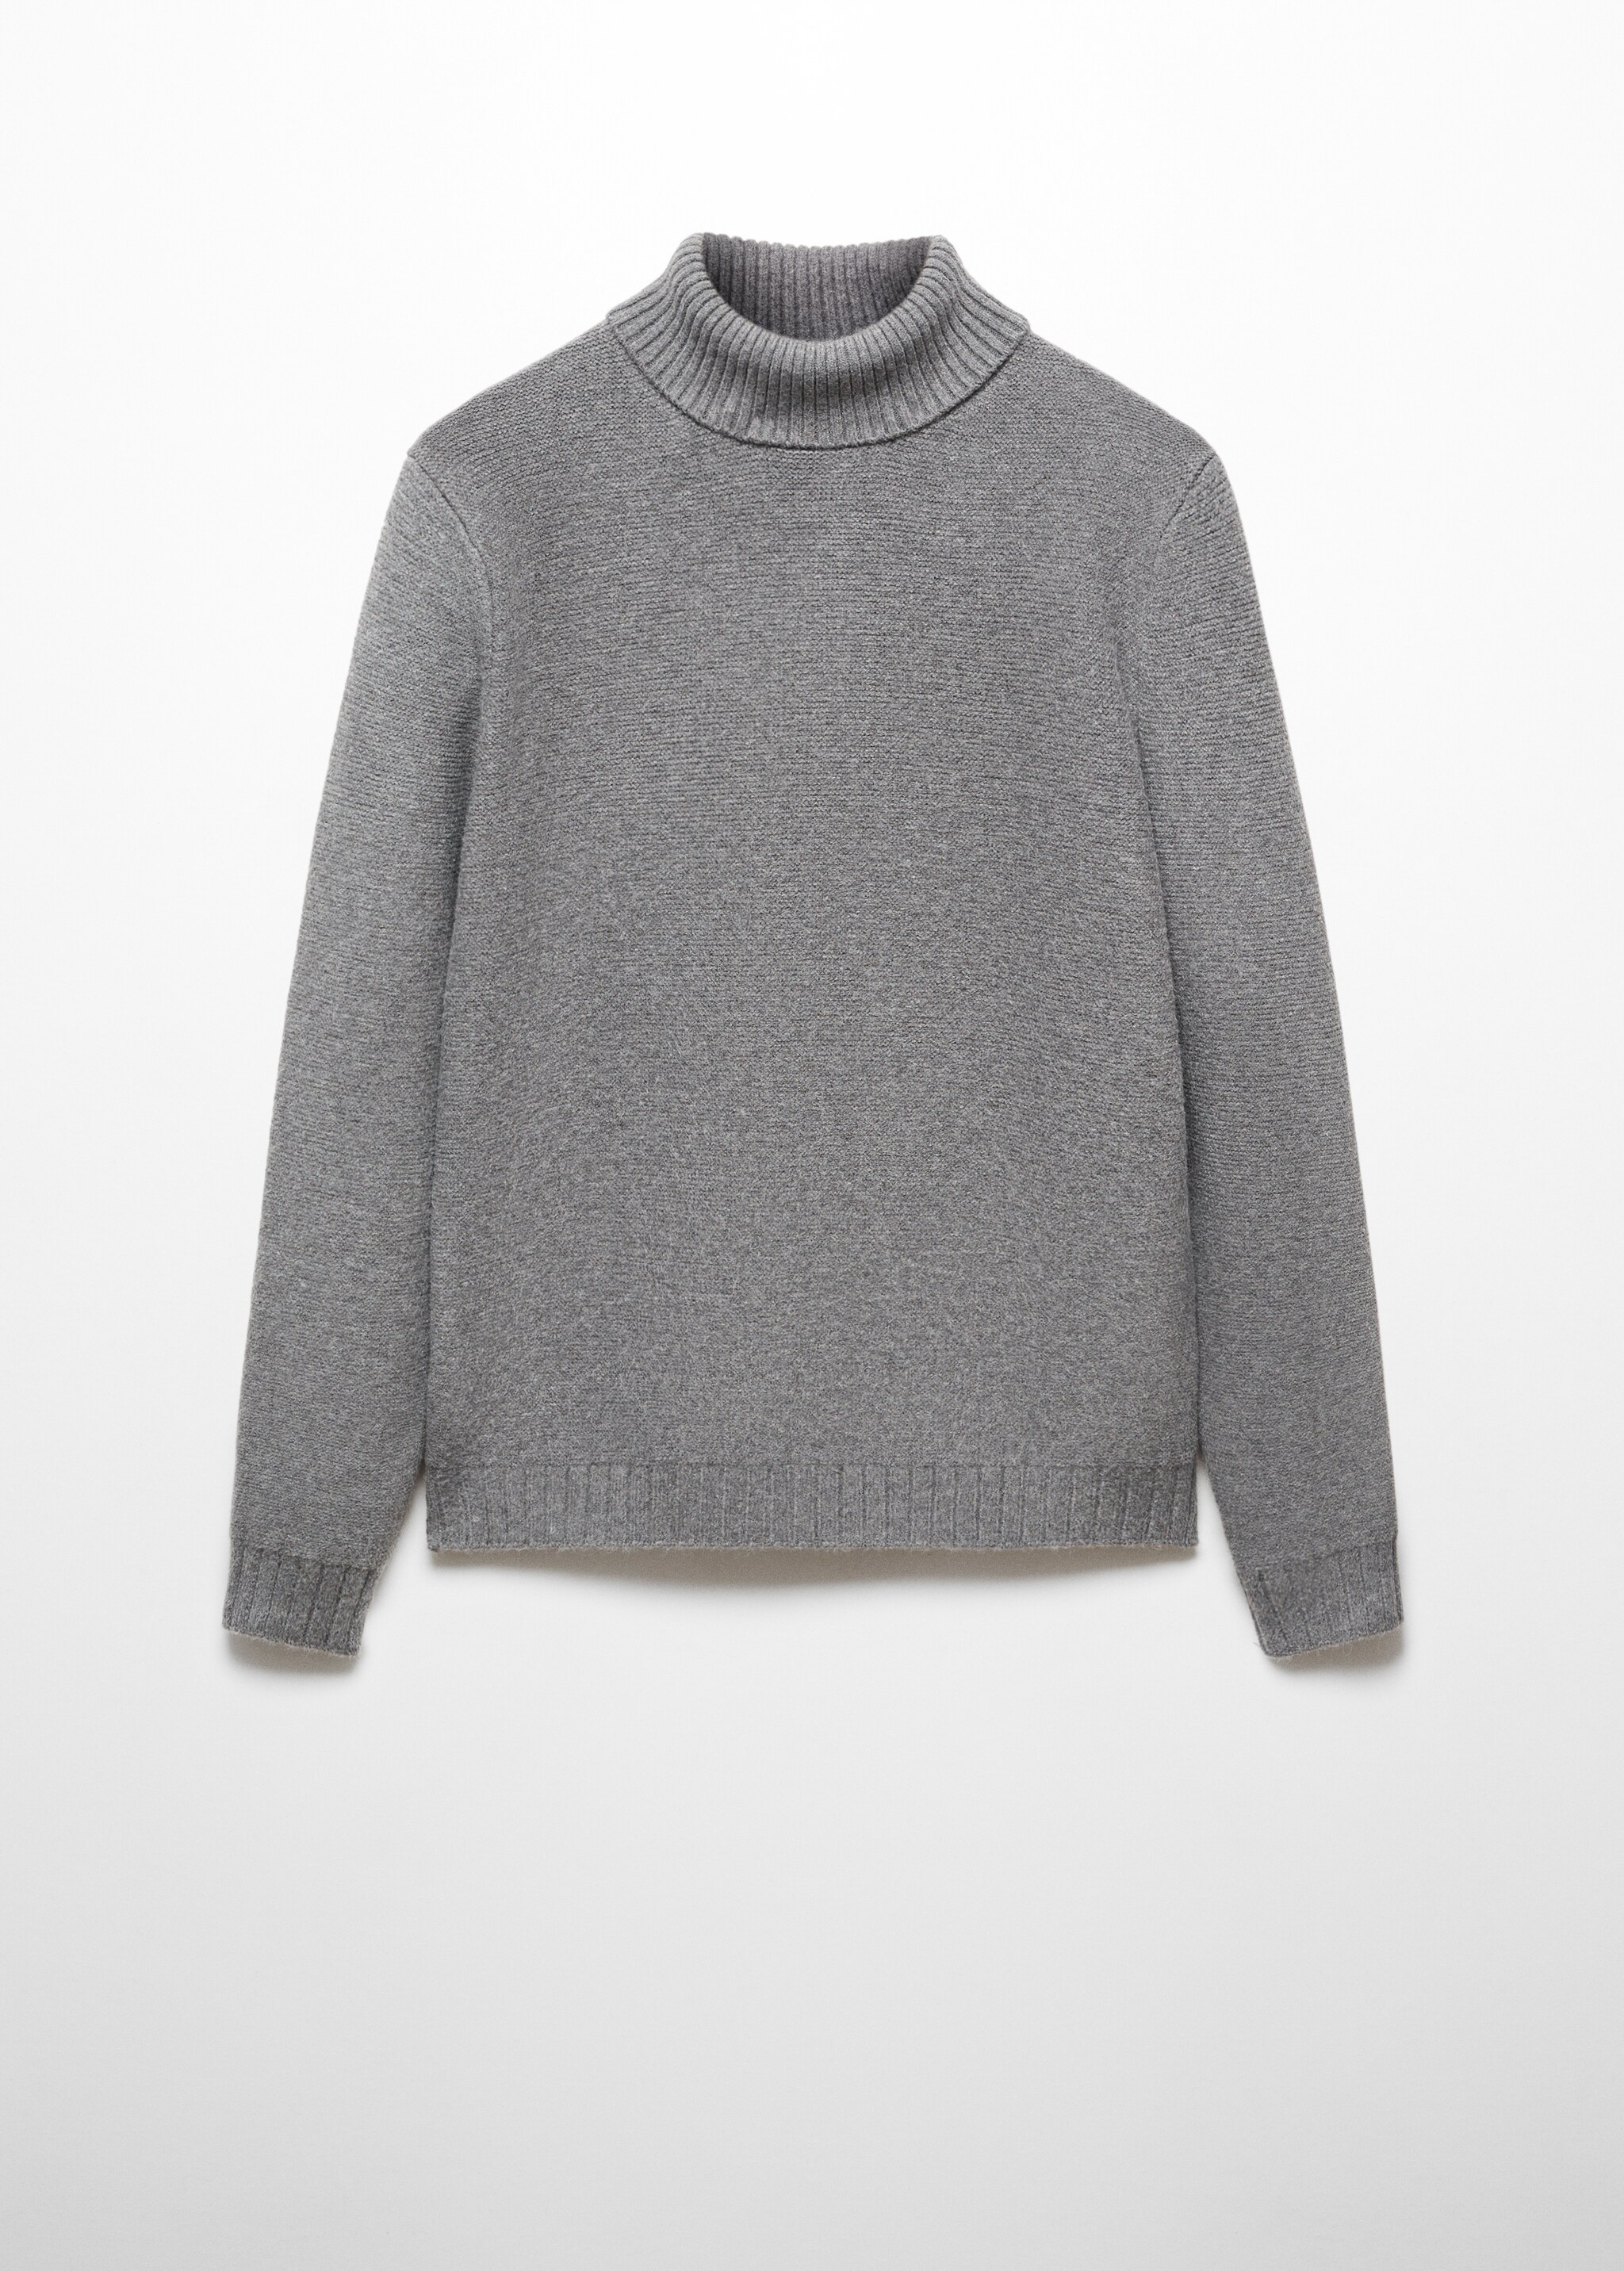 Turtleneck knit sweater - Article without model